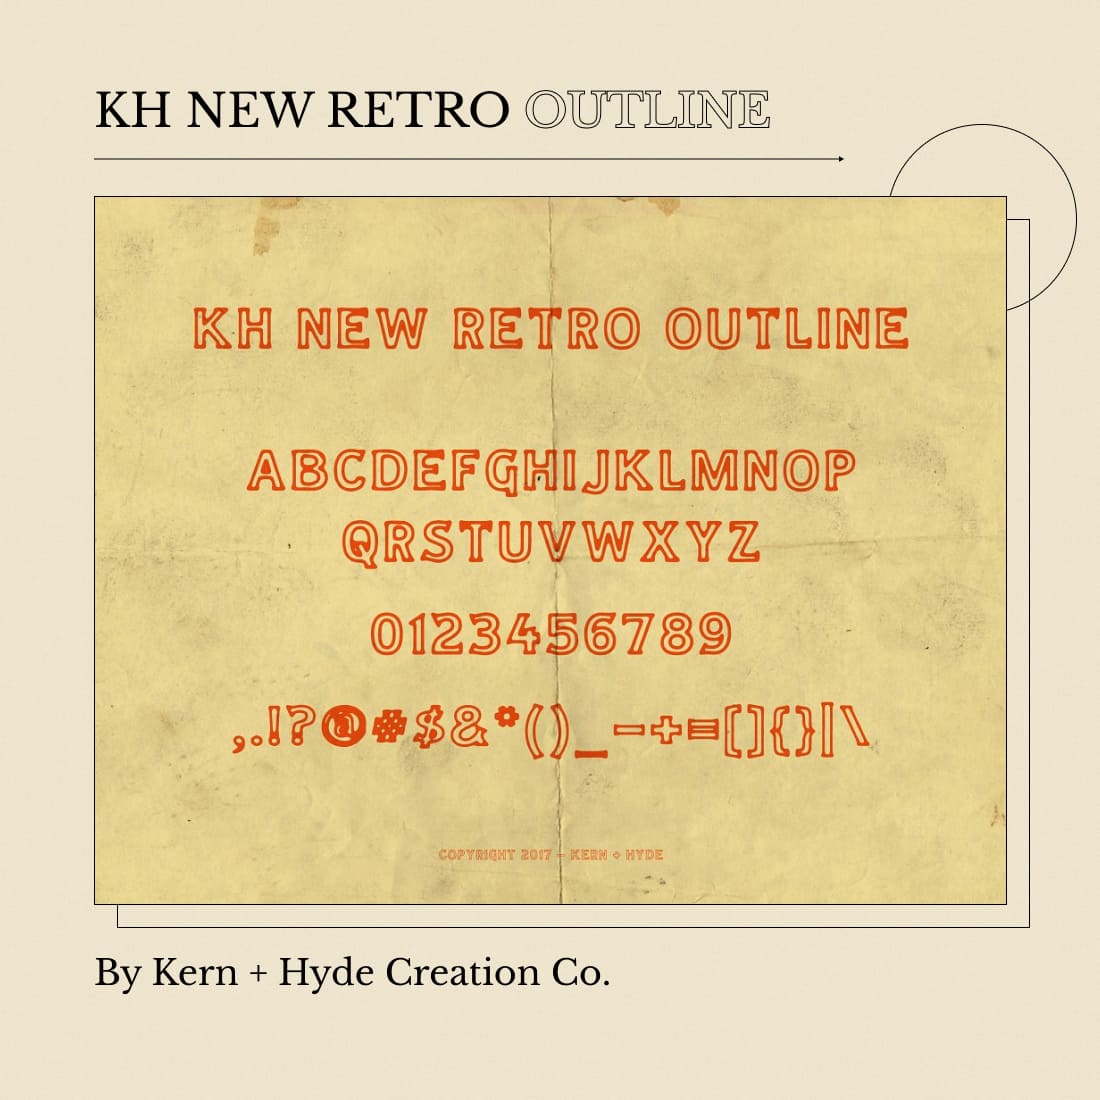 KH New Retro Outline Preview, By Kern + Hyde Creation Co.